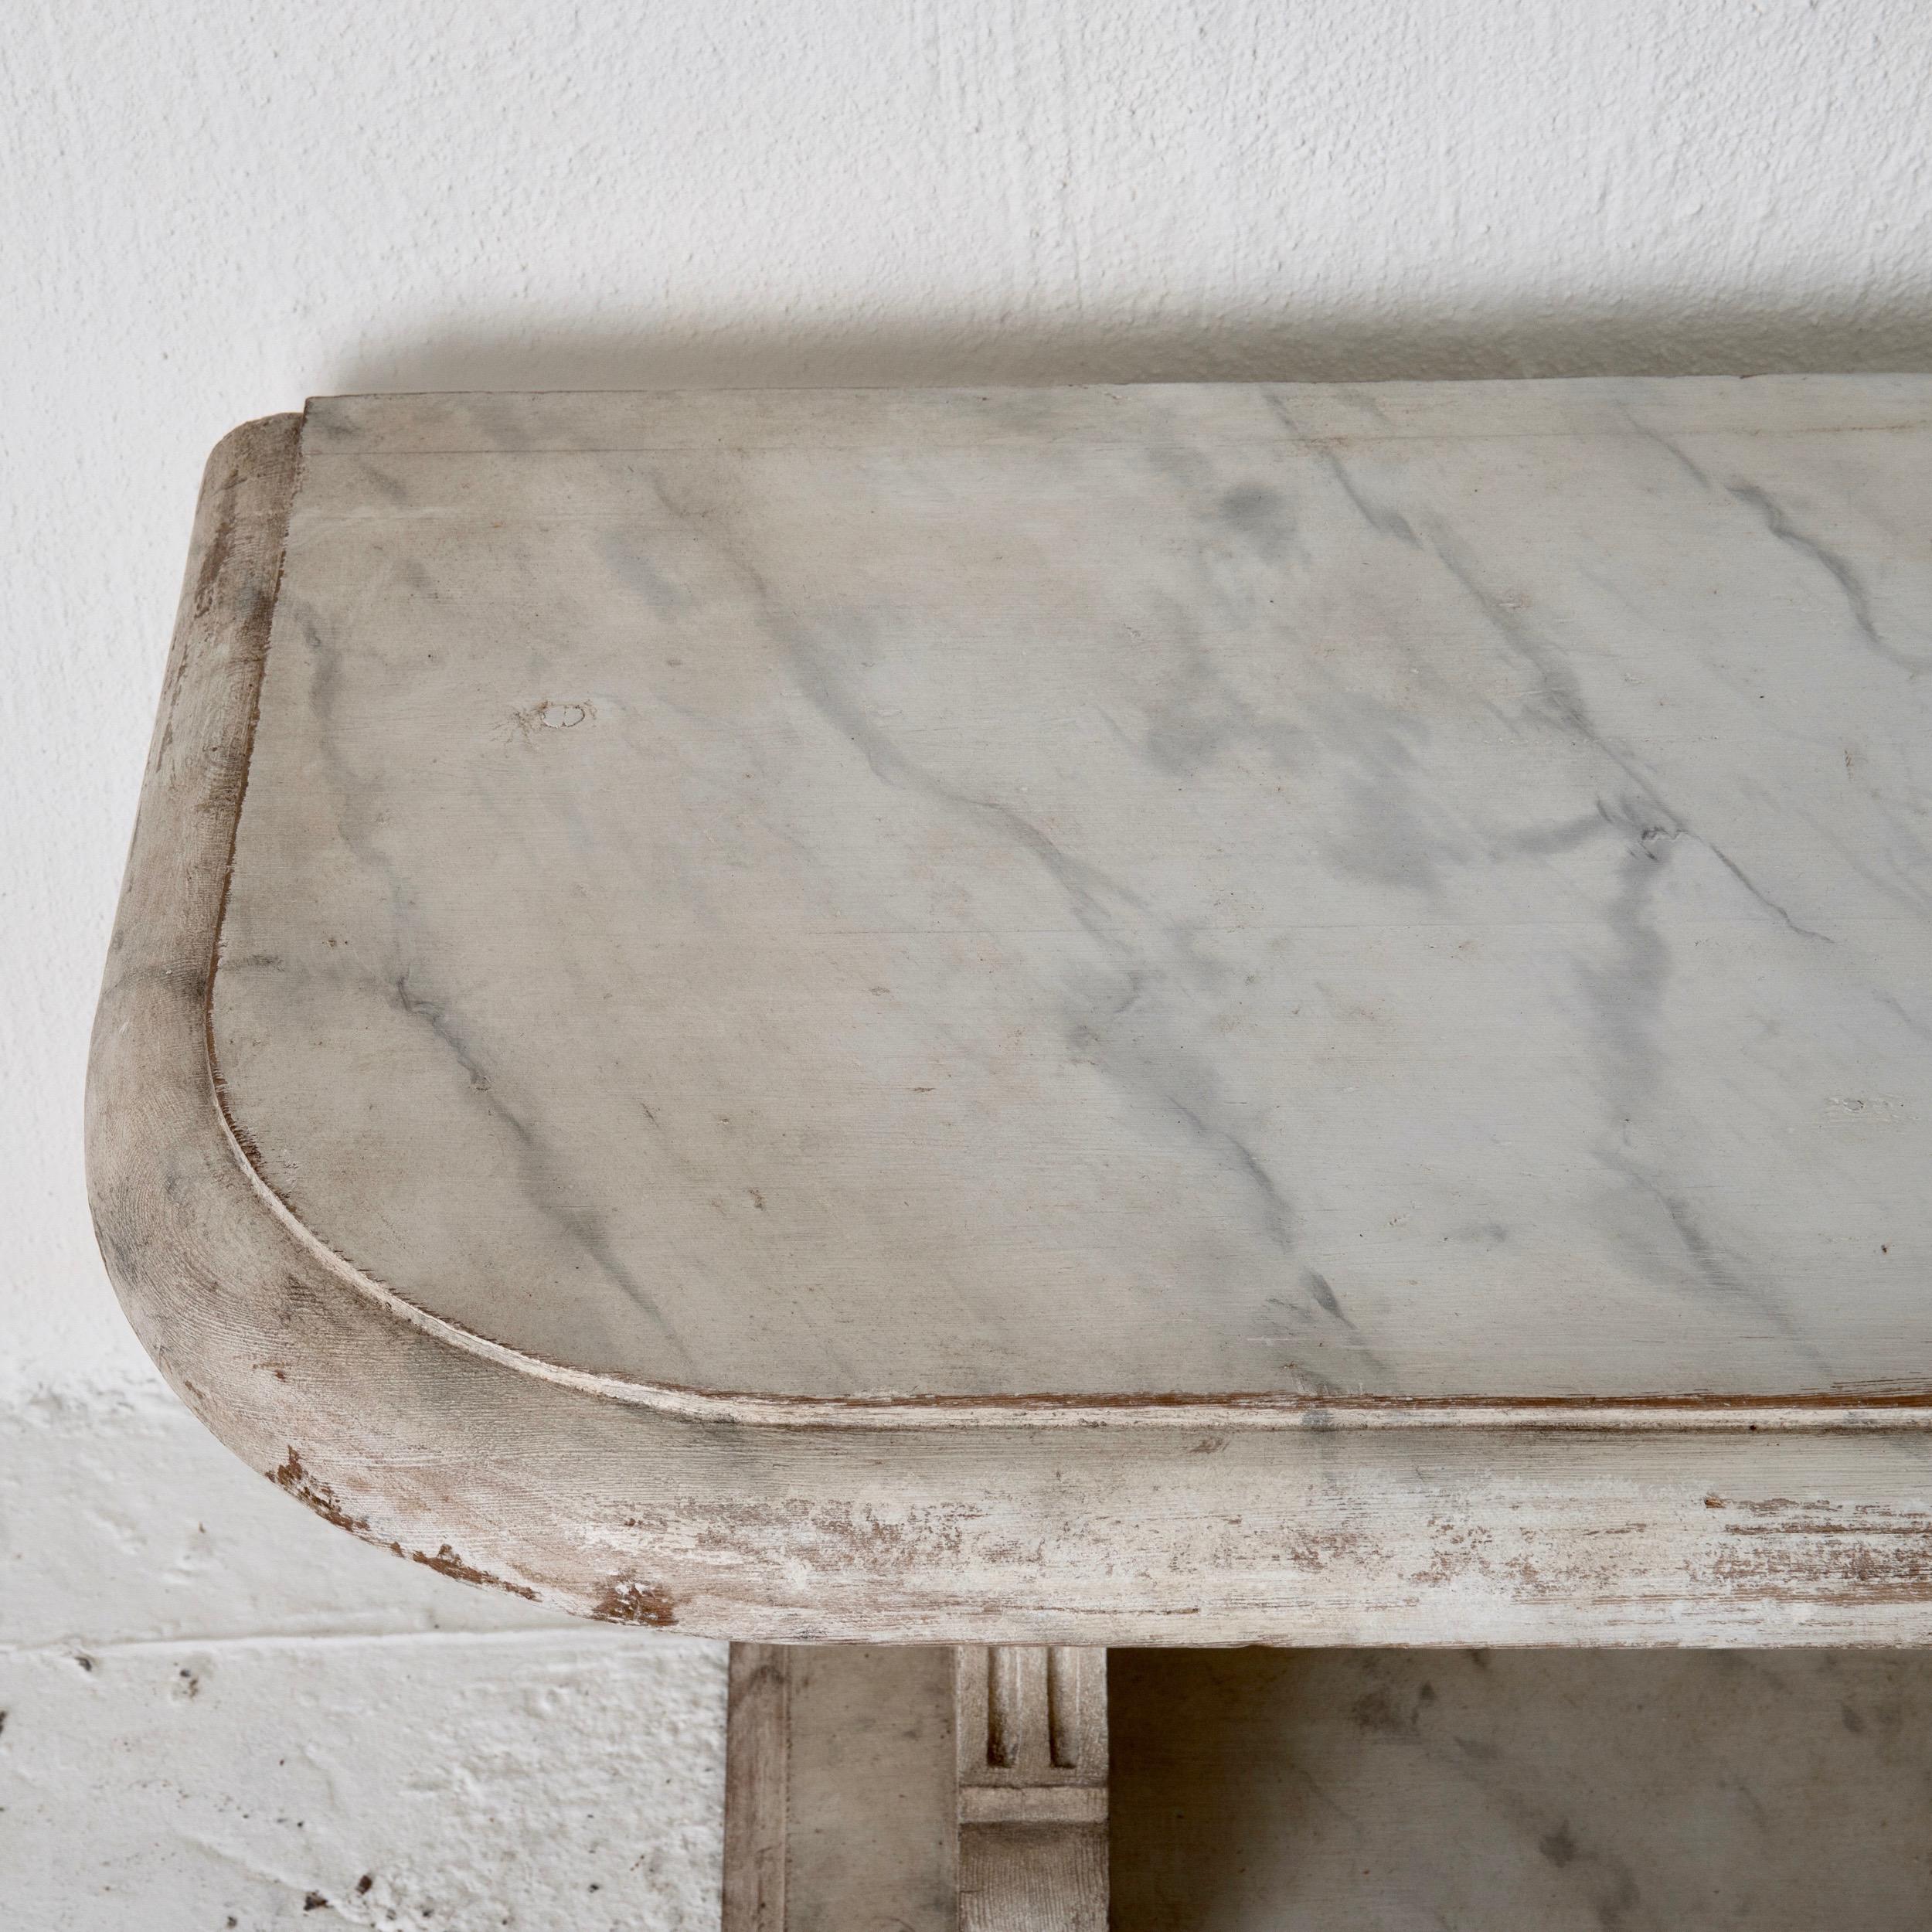 Bench console Swedish 18th century faux marble paint, Sweden. A bench made during the 18th century in Sweden. Painted later in a faux marble pattern. Rectangular shape with rounded corners. Channeled details on sides.
 
  